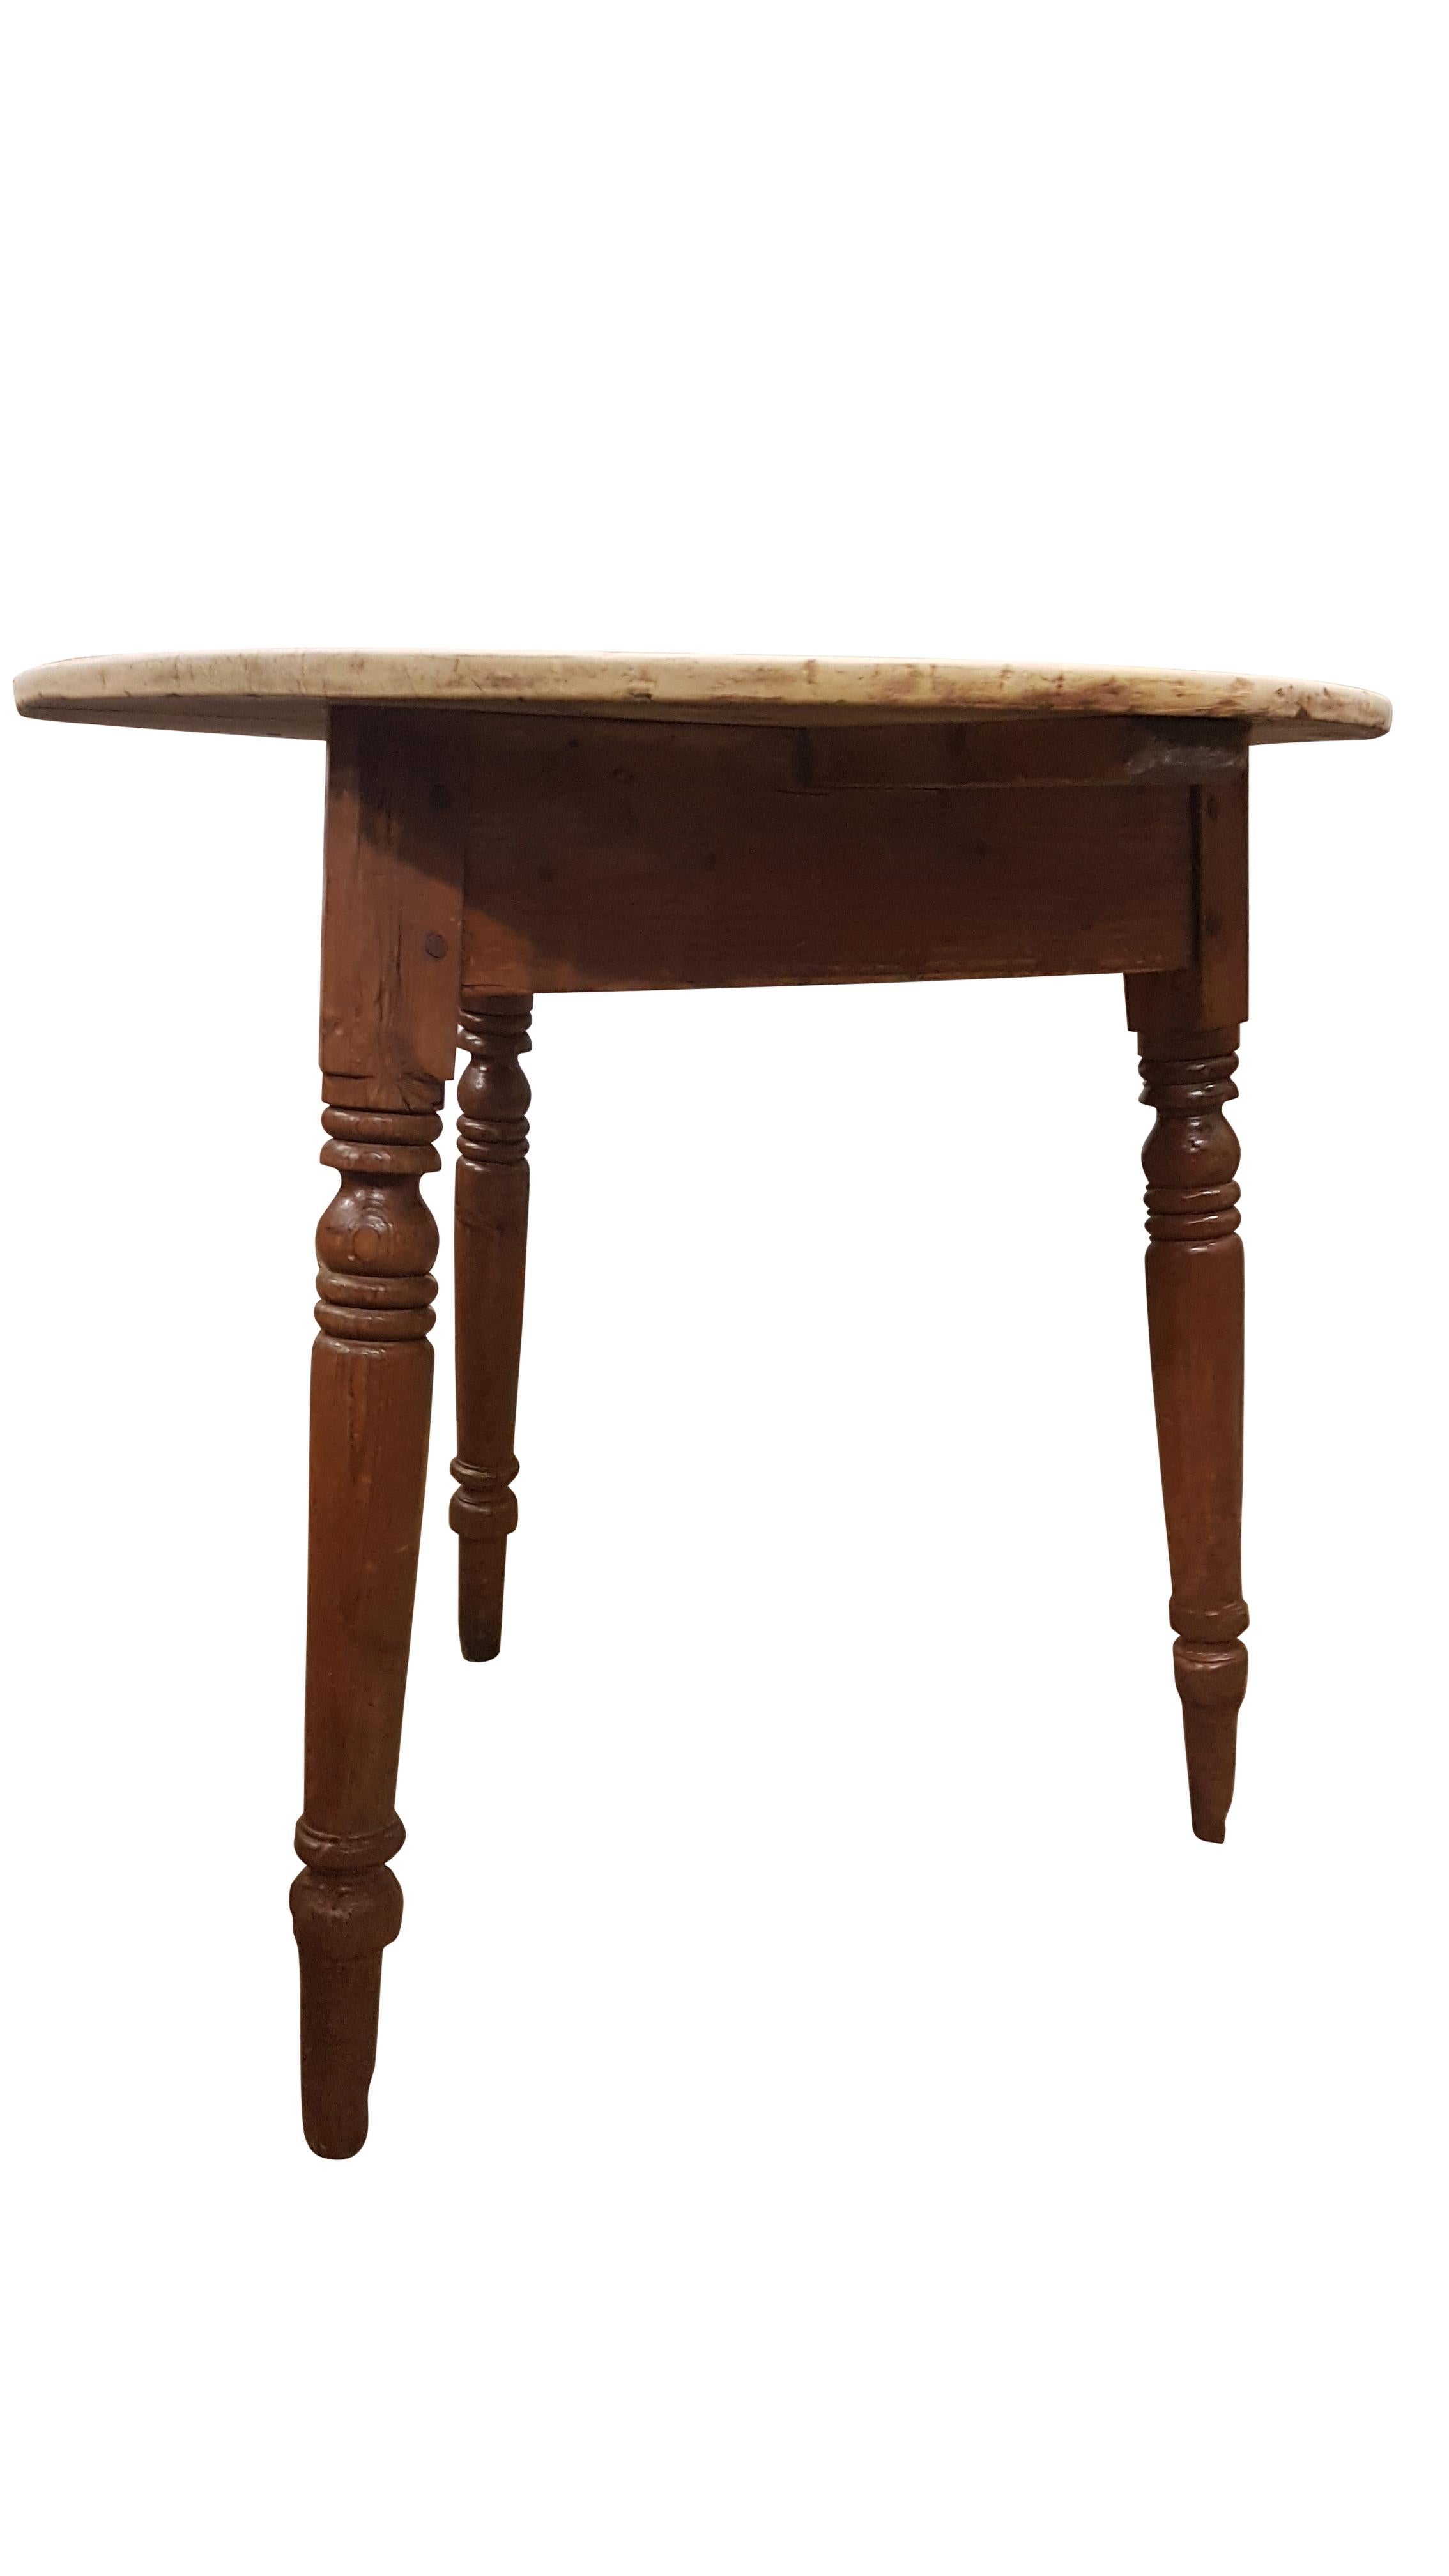 A very nice 19th century pine cricket table from an old farmhouse in Montgomeryshire in Wales.
The peg jointed turned legs have lovely wear to them and a great color, the top is a pale raw scrub top. The table sits nicely with good presence standing